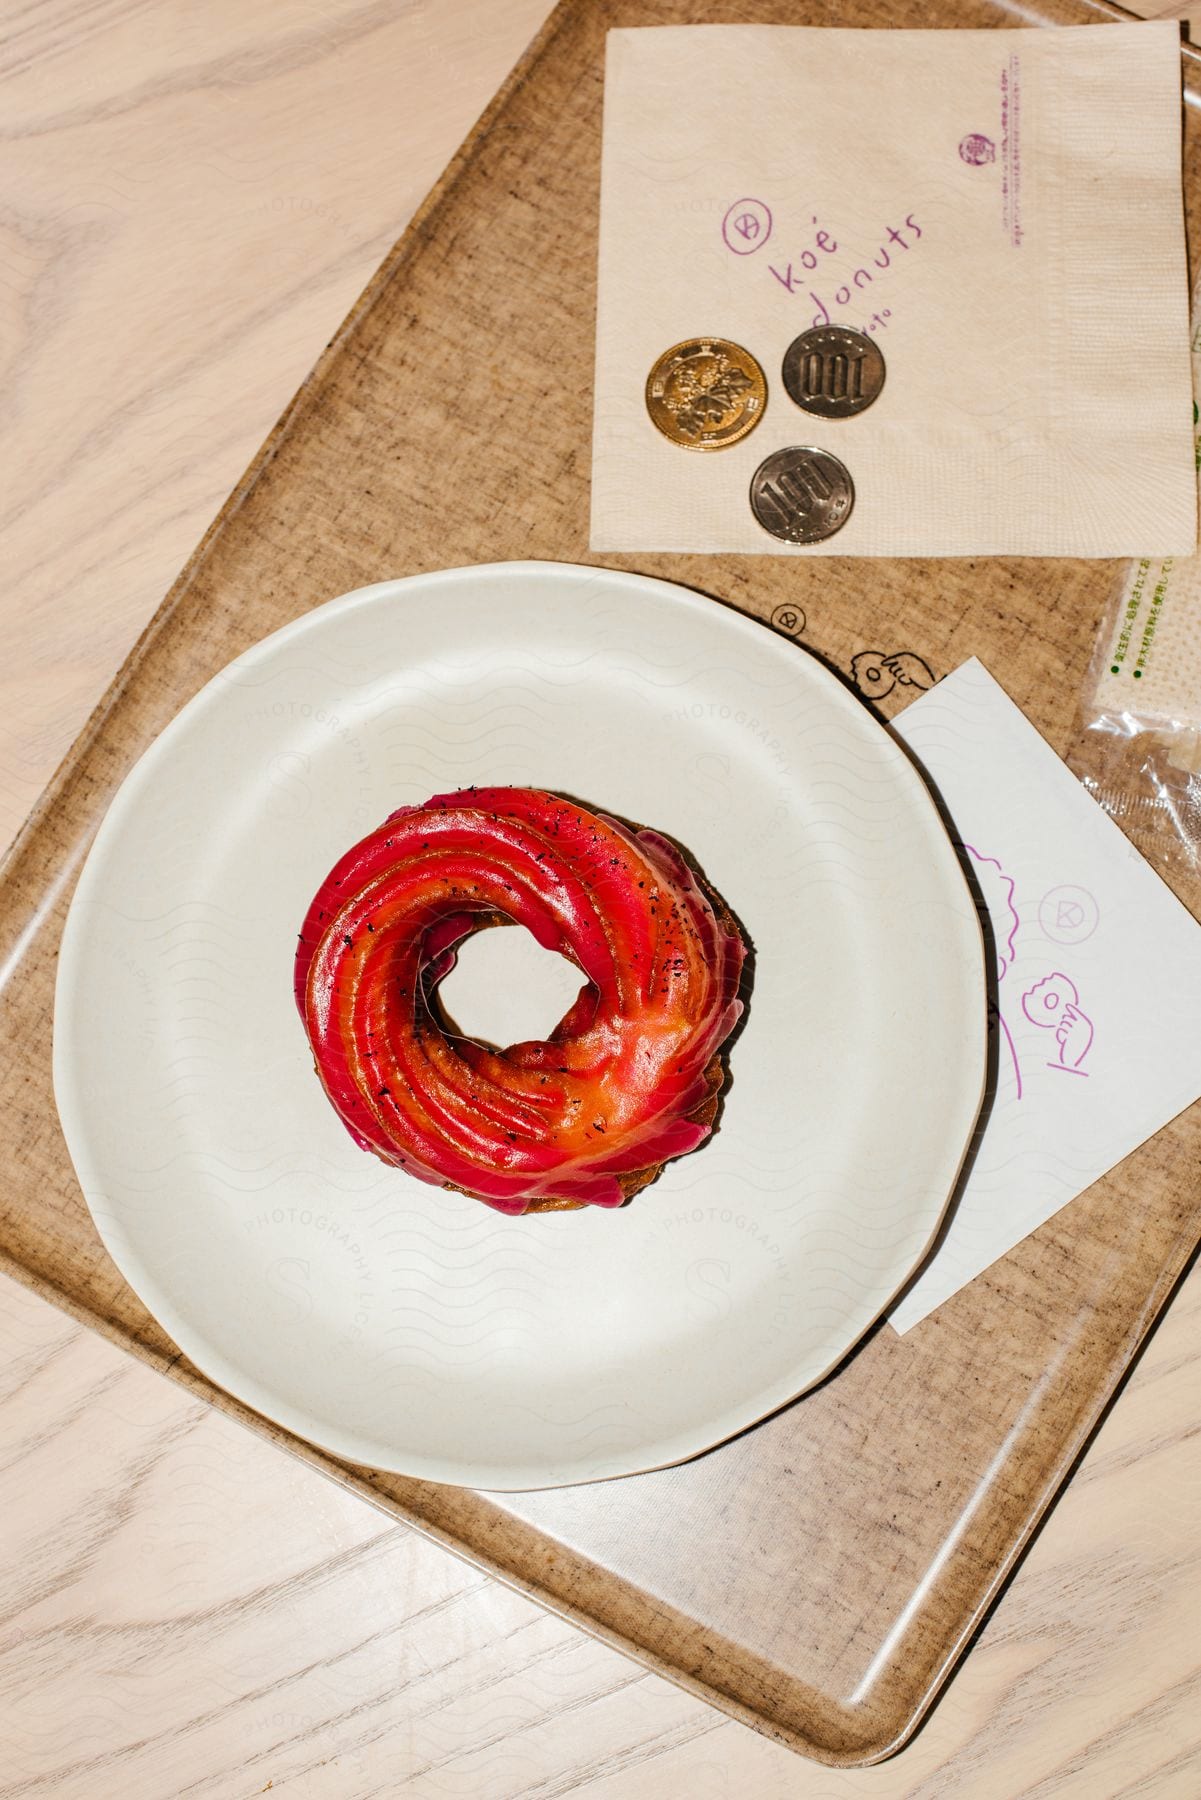 A red frosted donut on a white plate sitting on a placemat with a drawing underneath and writing on a napkin